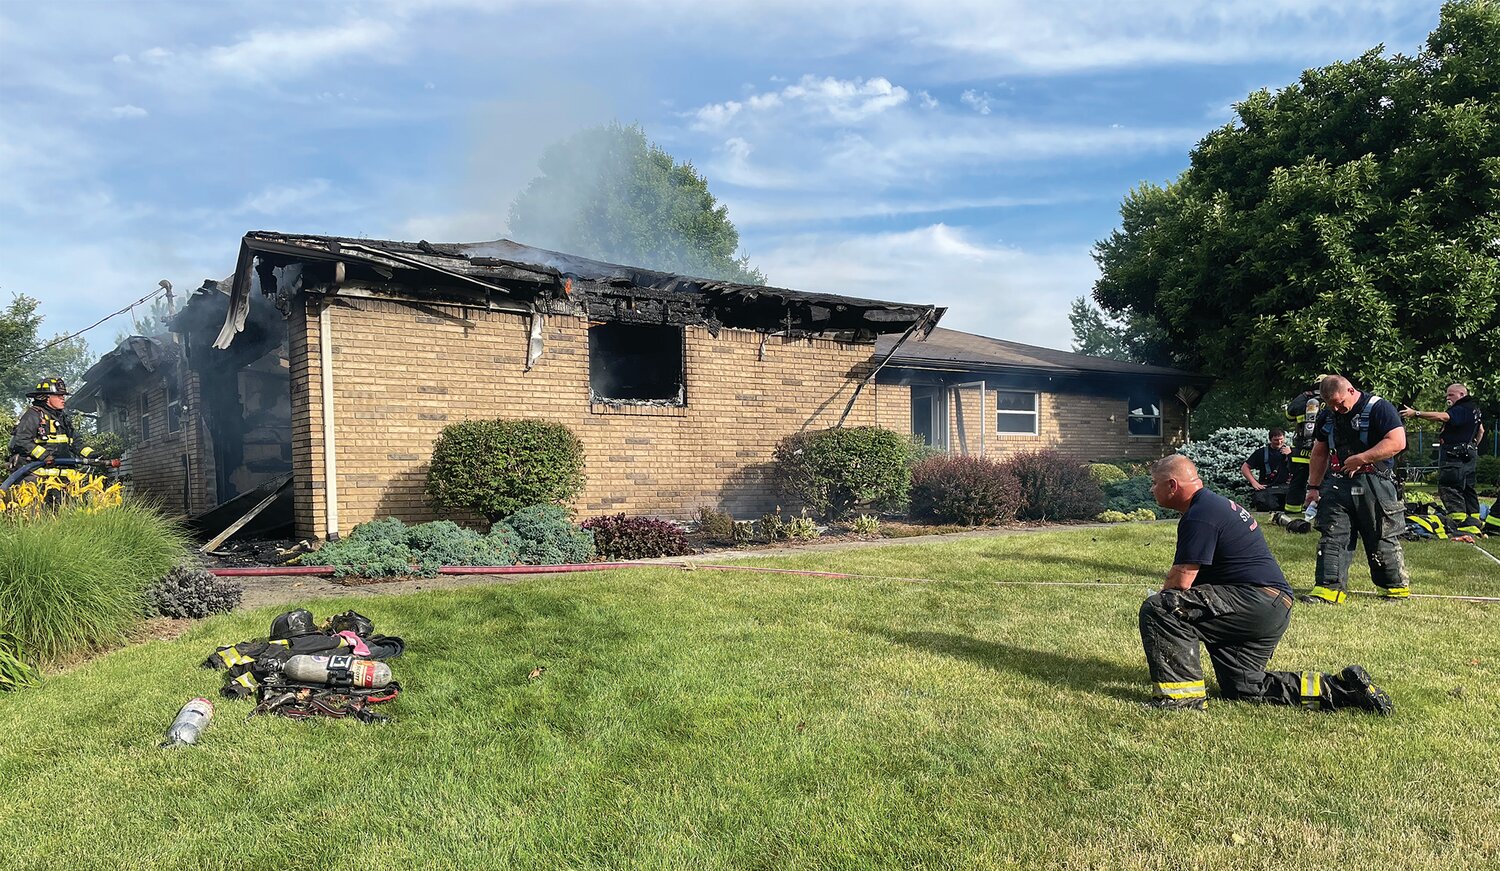 Crawfordsville firefighters were dispatched at 8:03 a.m. Tuesday to a fire at a single-family home at 3405 N. C.R. 100W.